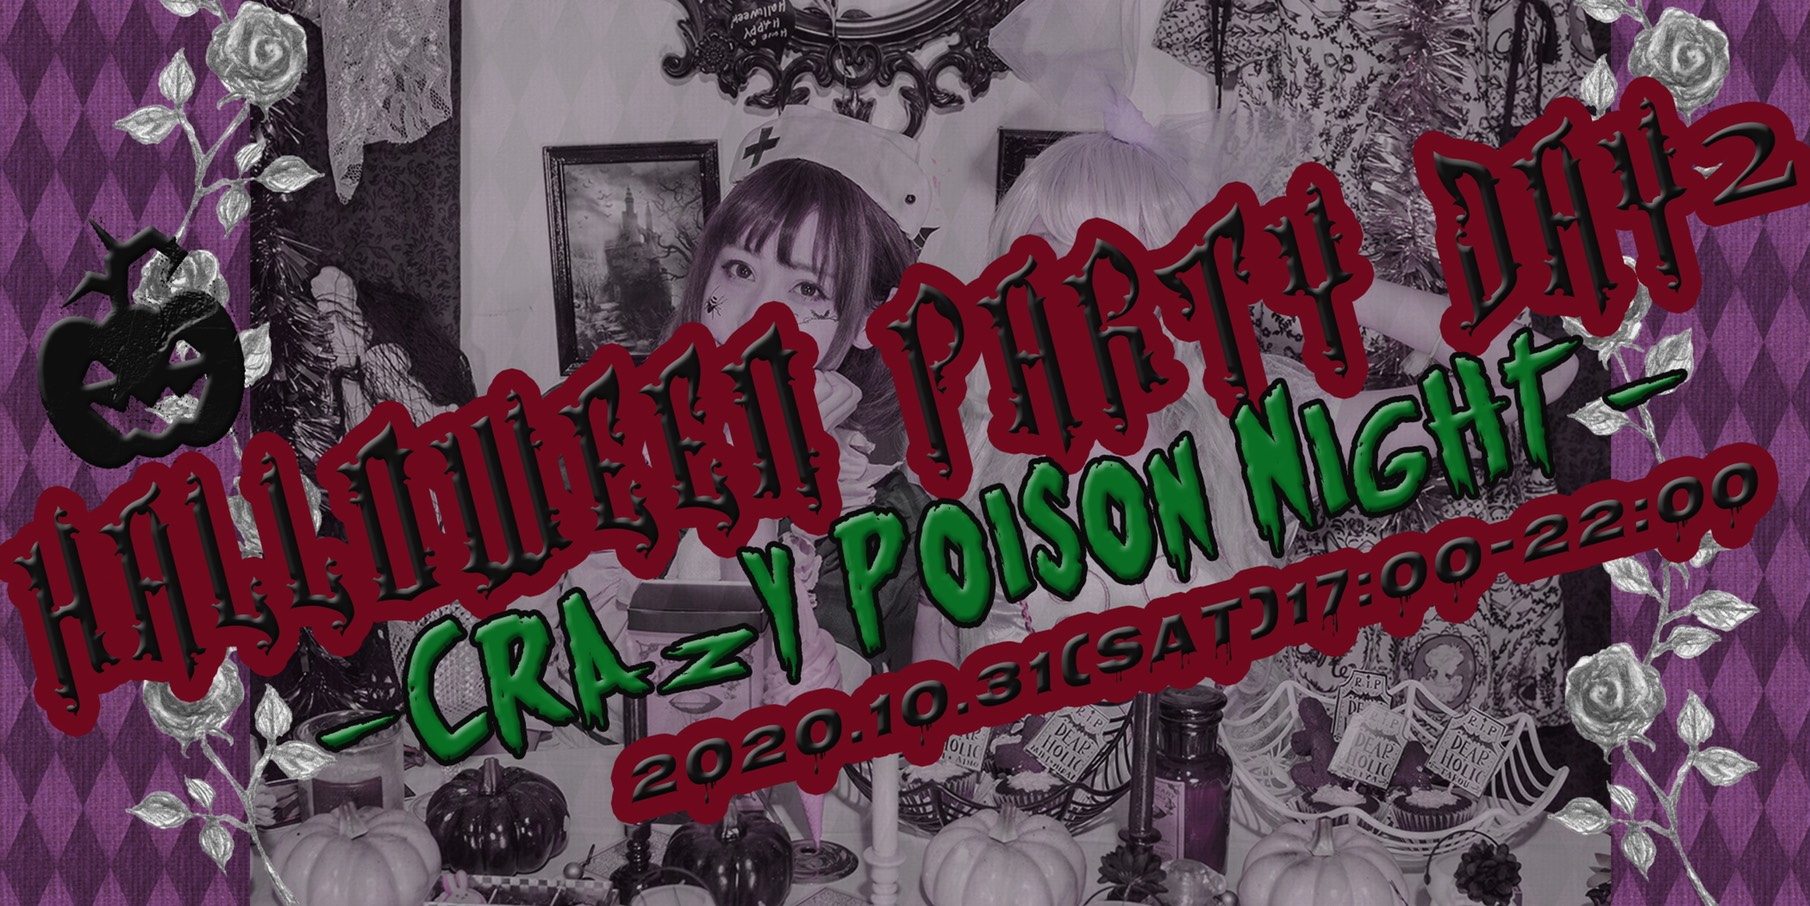 HALLOWEEN PARTY DAY2 -CLAZY POISON NIGHT-